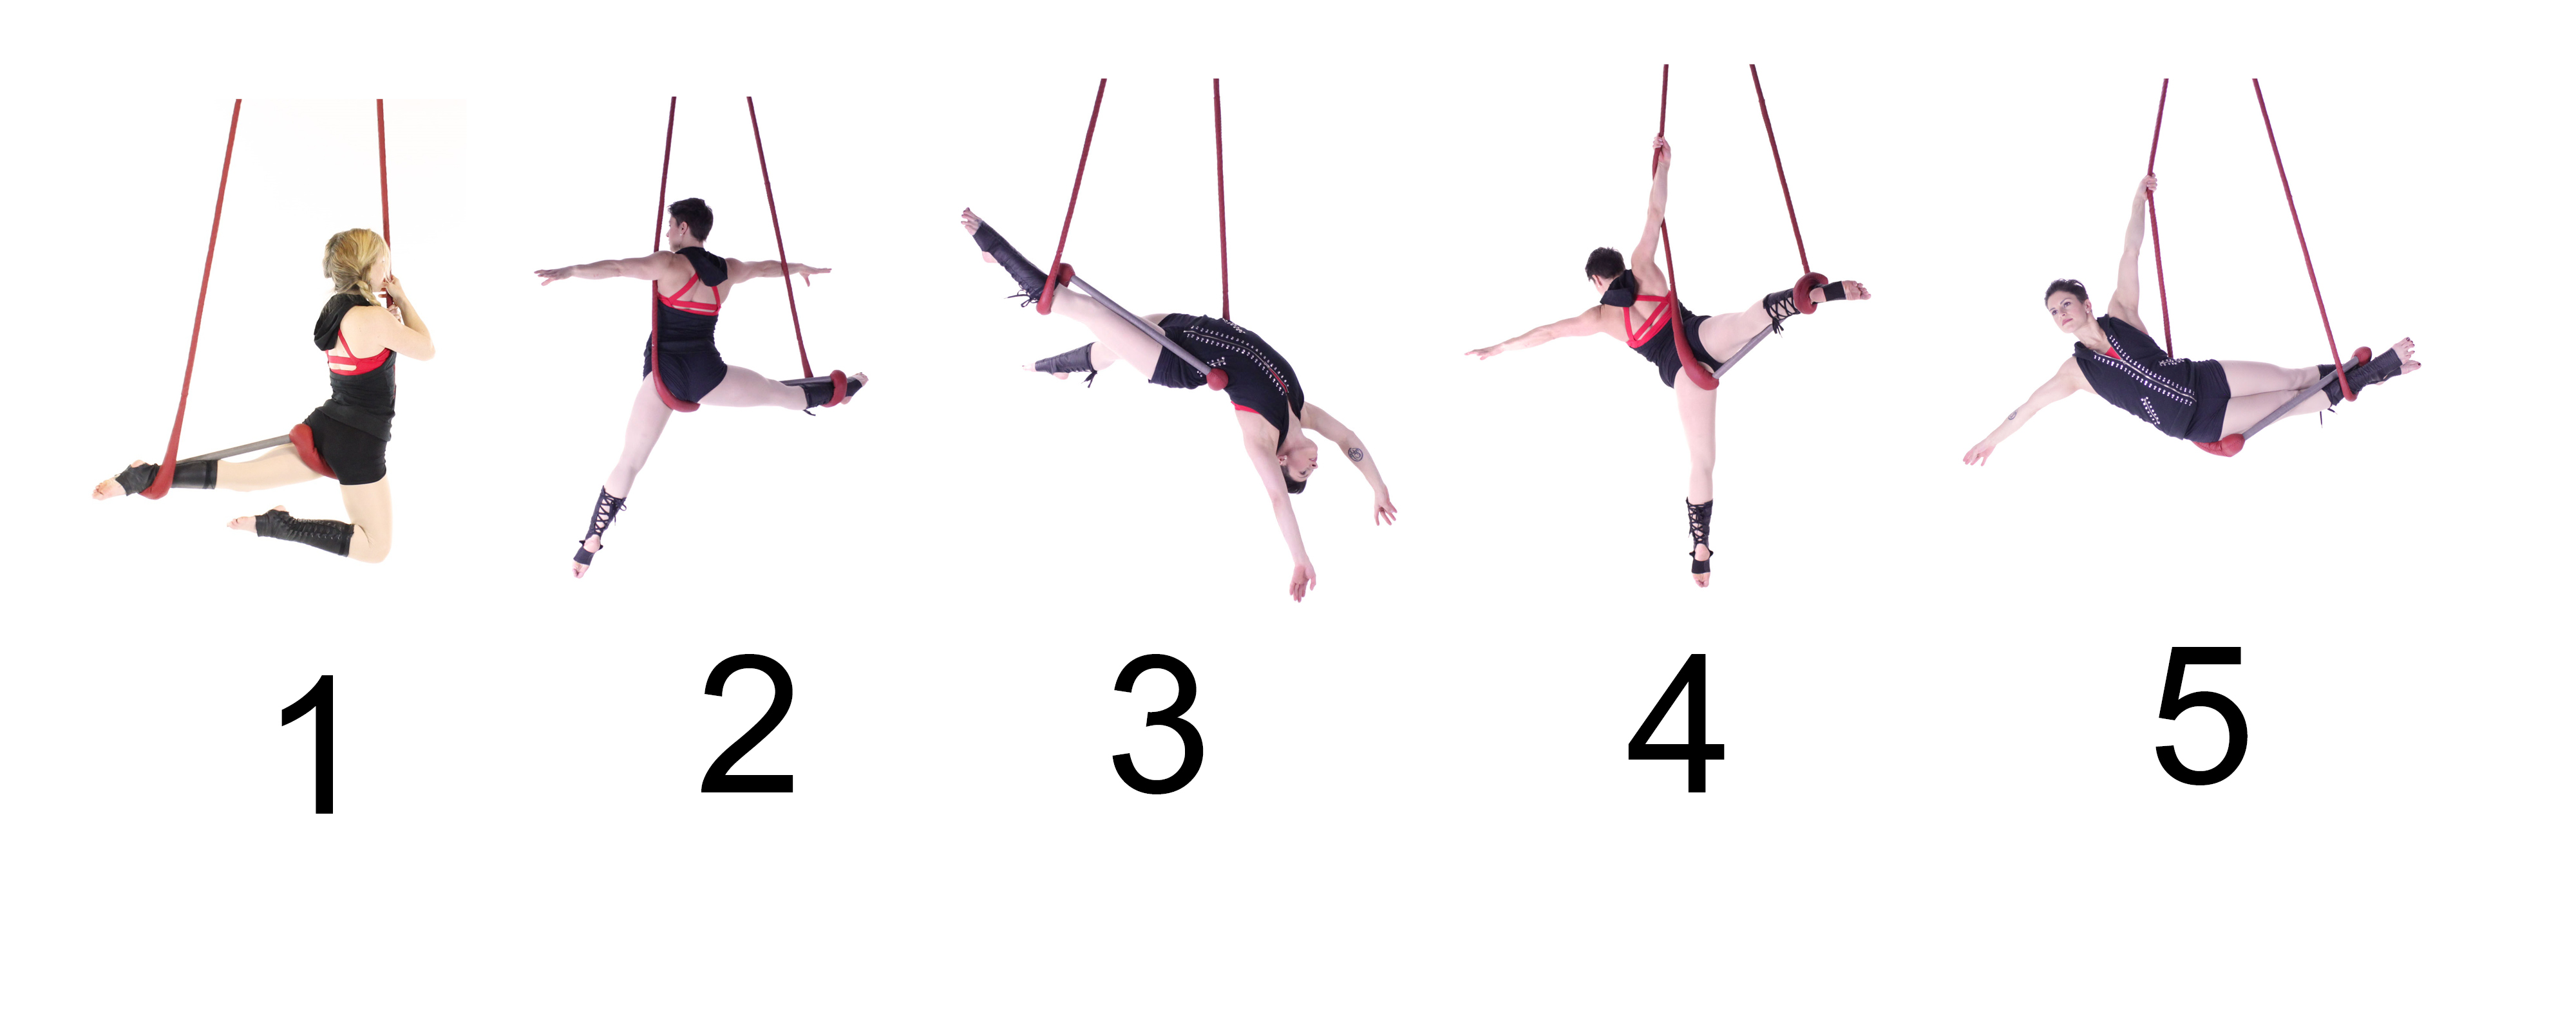 Trapeze Contributions by Guest Artist McKinley Vitale www.aerialdancing image image